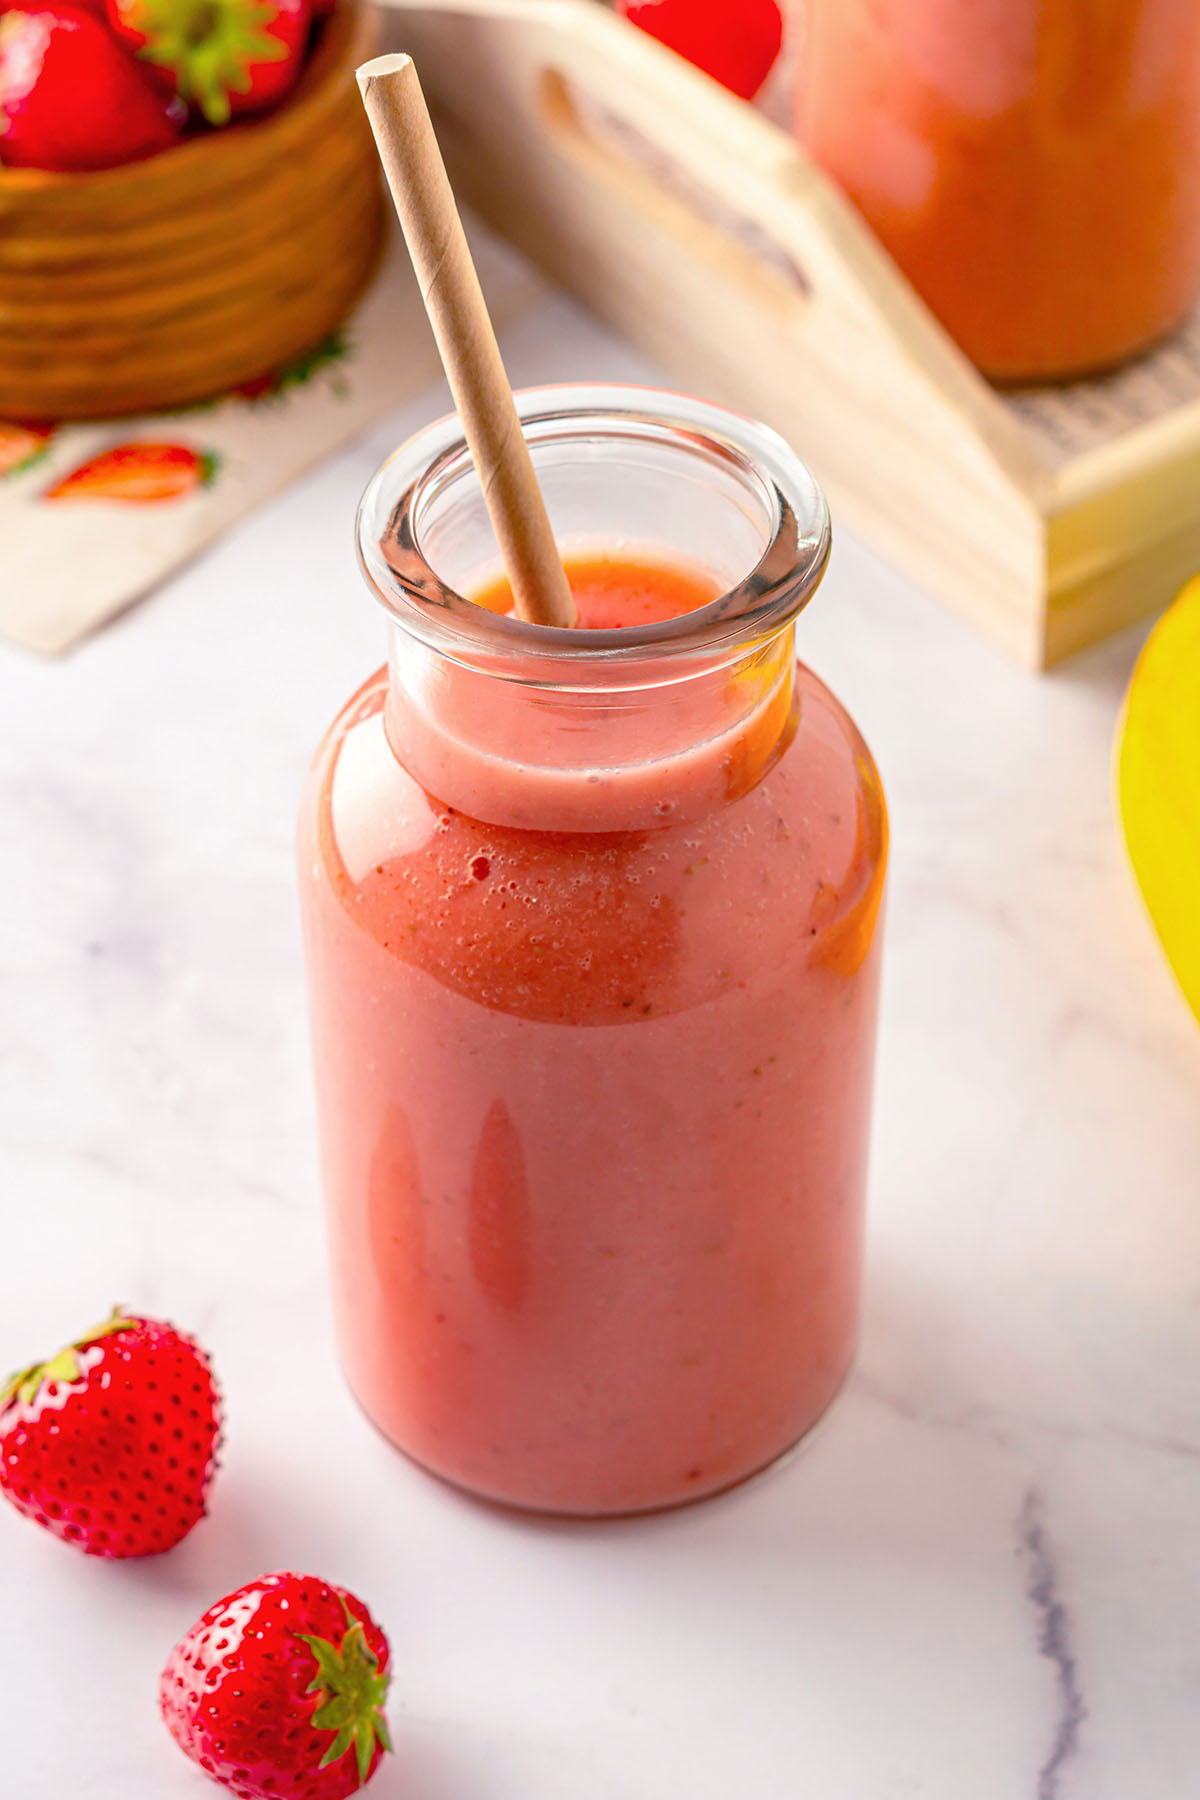 Bottle of strawberry apple smoothie